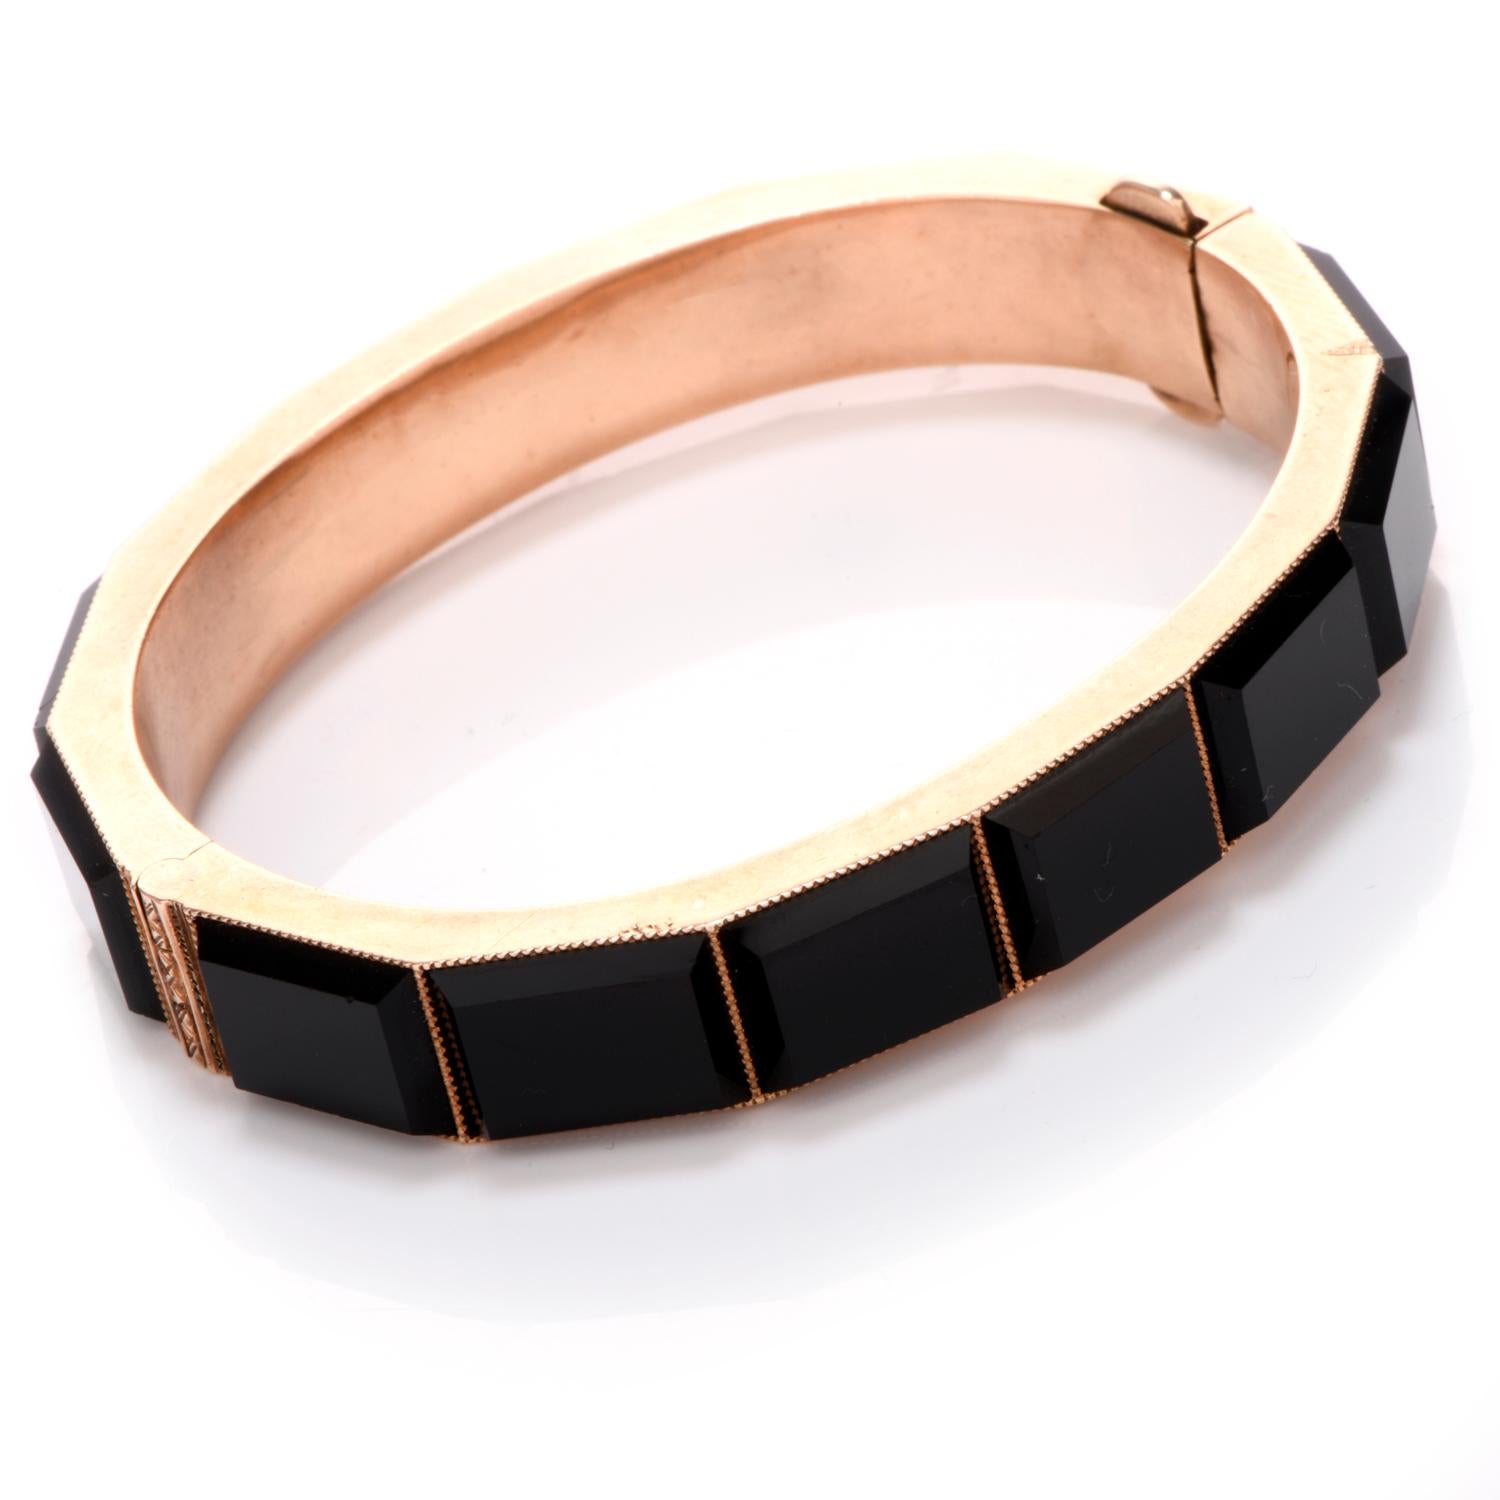 This antique victorian bracelet was inspired by a love of geometric design and crafted in 14K Rose gold.

14 individual sheets of Black Onyx adorn around this geometrically designed bracelet, each measuring approximately 9 x 12mm.

The Onyx is a